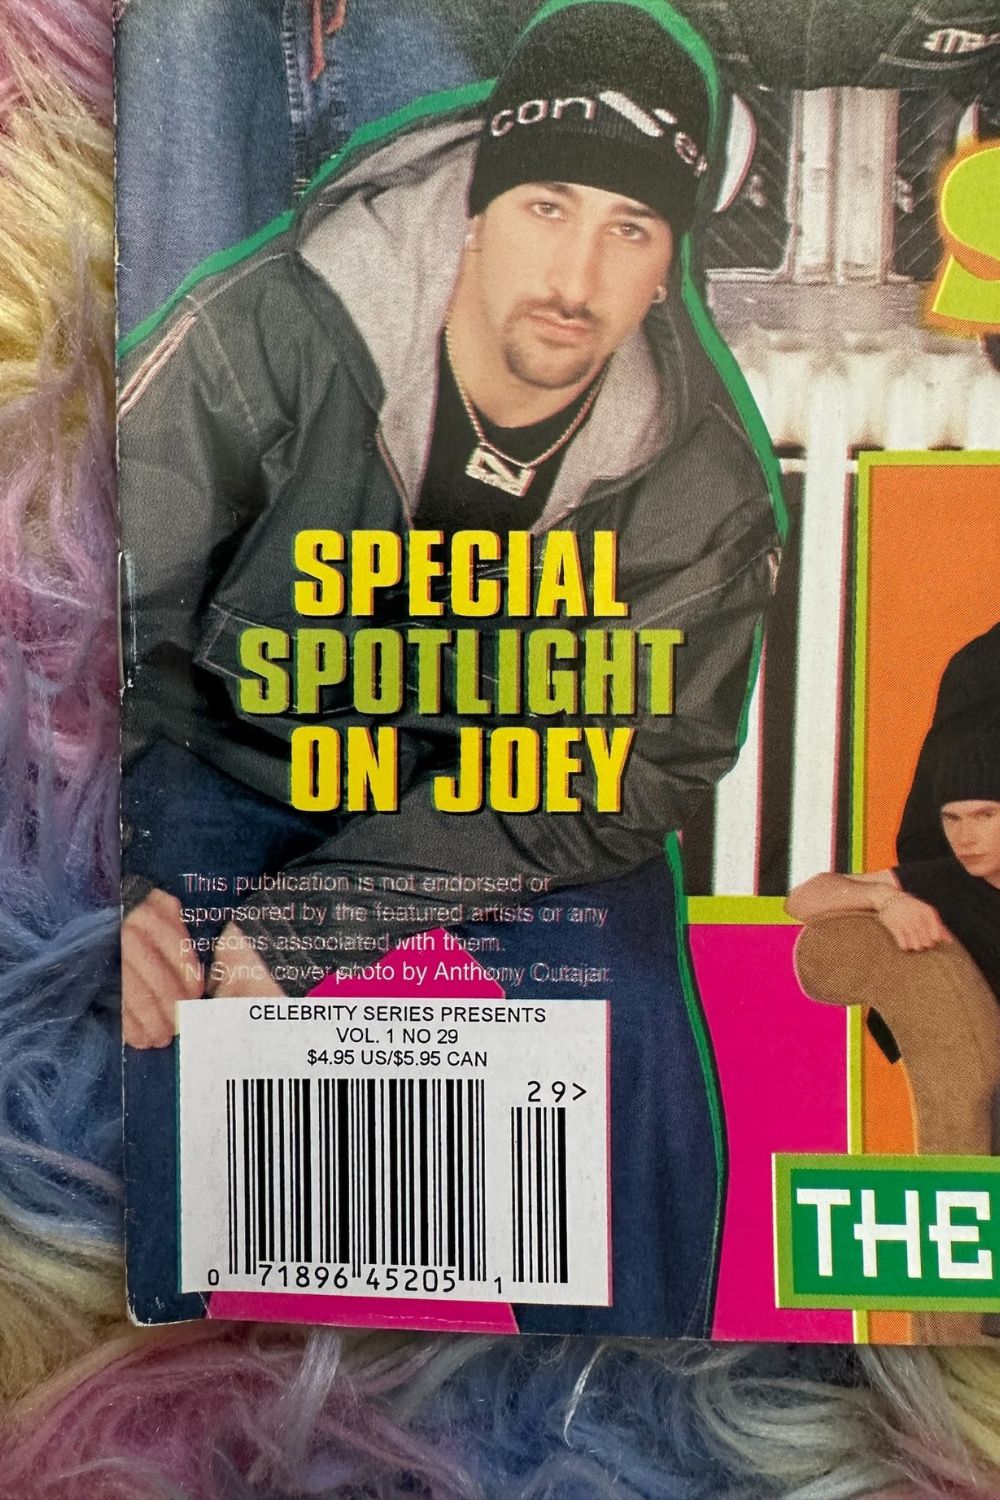 TUDE: 'N SYNC AND ALL YOUR FAVORITE MUSIC STARS MAGAZINE*